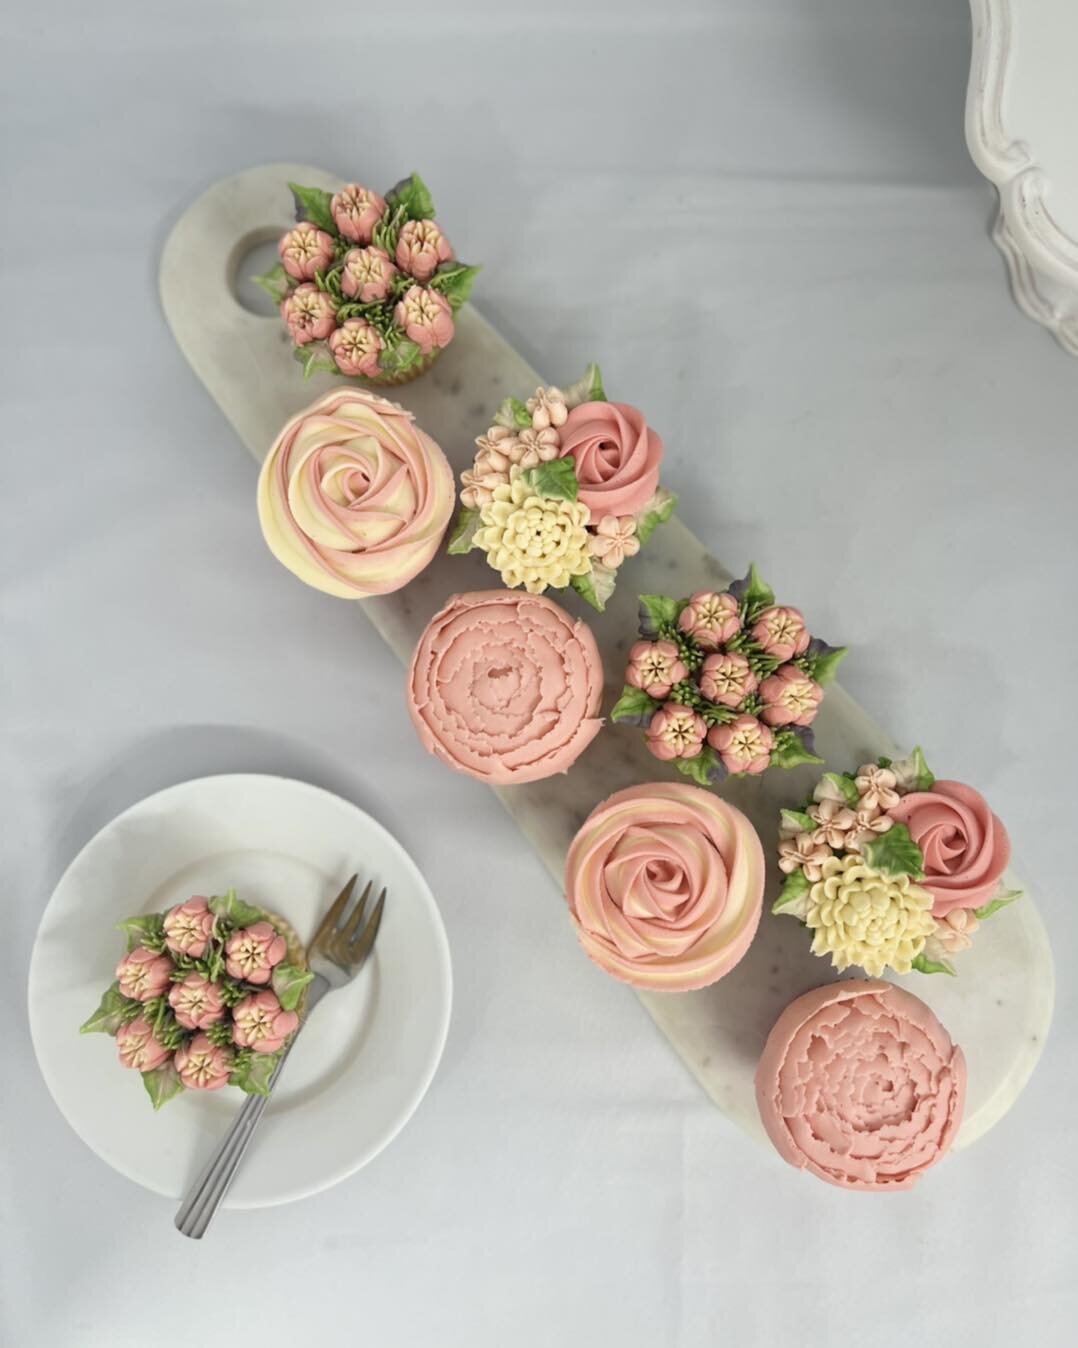 Perfect addition to any party!
Now taking orders https://www.tarasbakedbouquets.ie/small-cupcake-bouquet #cupcakes #cupcakeflowerbouquets #cupcakeflowerbouquet #floralcupcakebouquet #floralcupcake #cupcakeflower #cupcakeflowers #tarasbakedbouquets #i